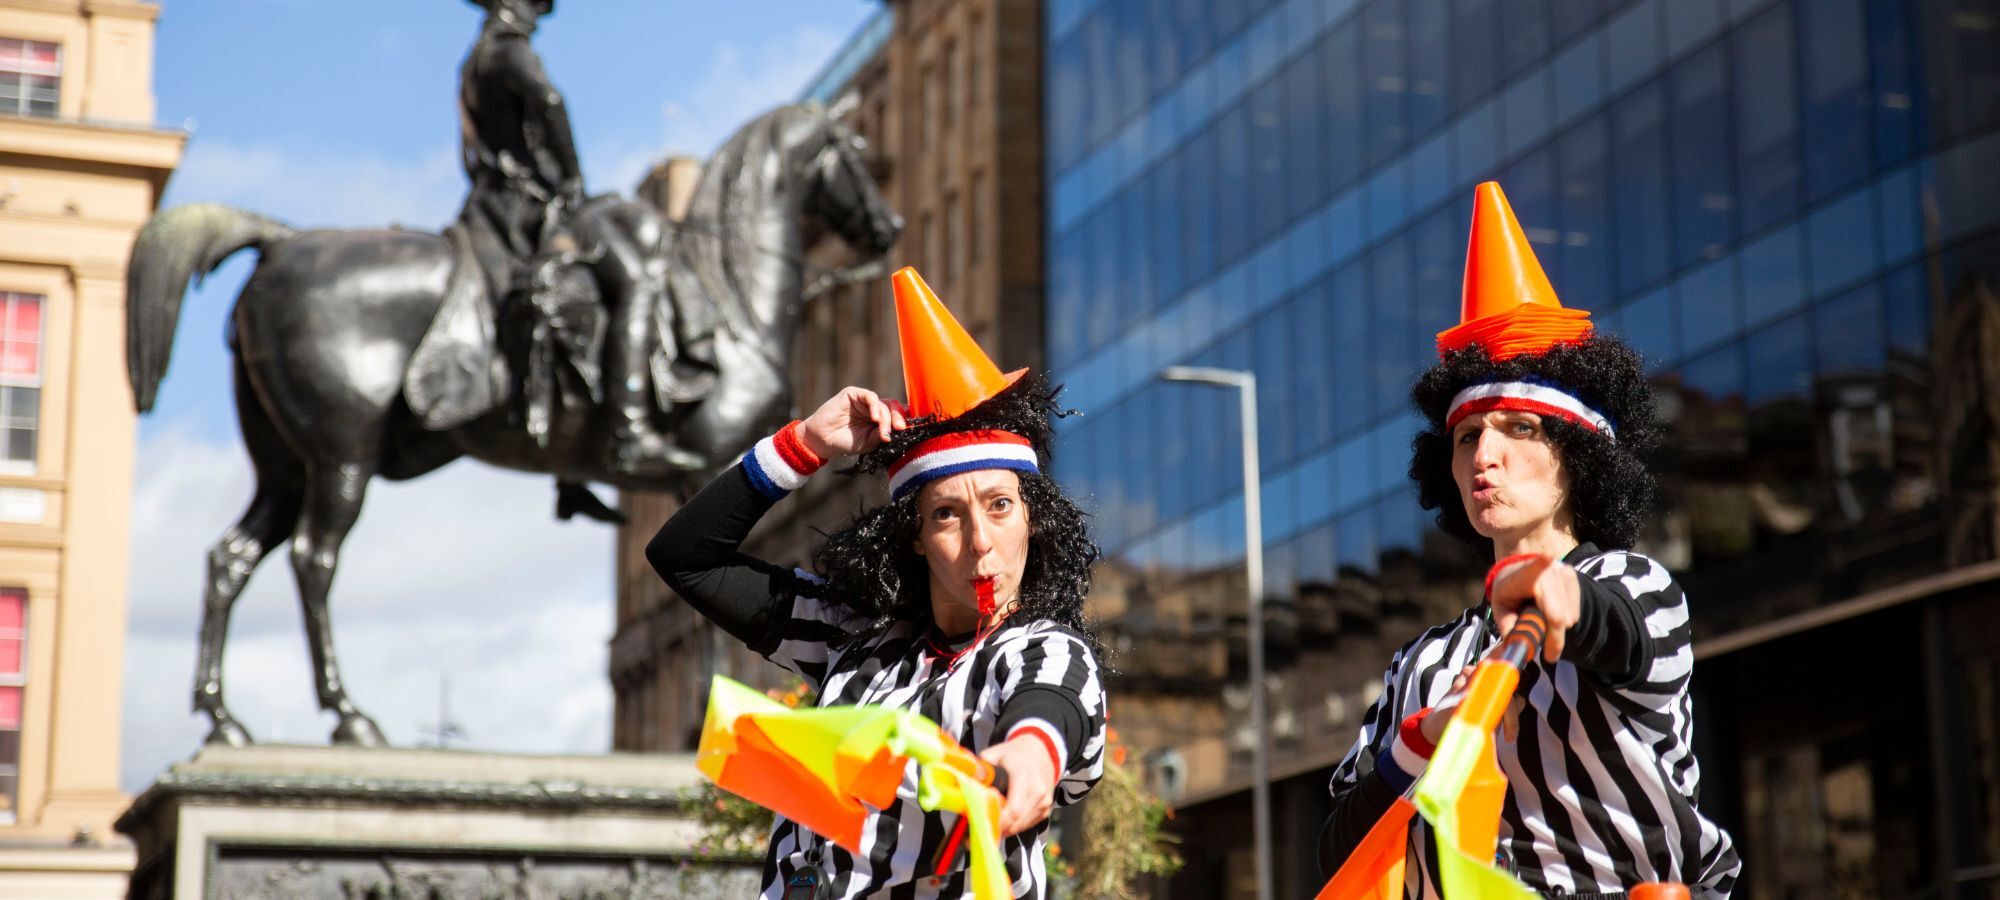 The Refs, two children's street entertainers, are stood in a city square, wearing black-and-white-striped referee t-shirts, small orange cones on their heads and holding out two orange flags. They are both wearing animated expressions, one person is blowing a red whistle.